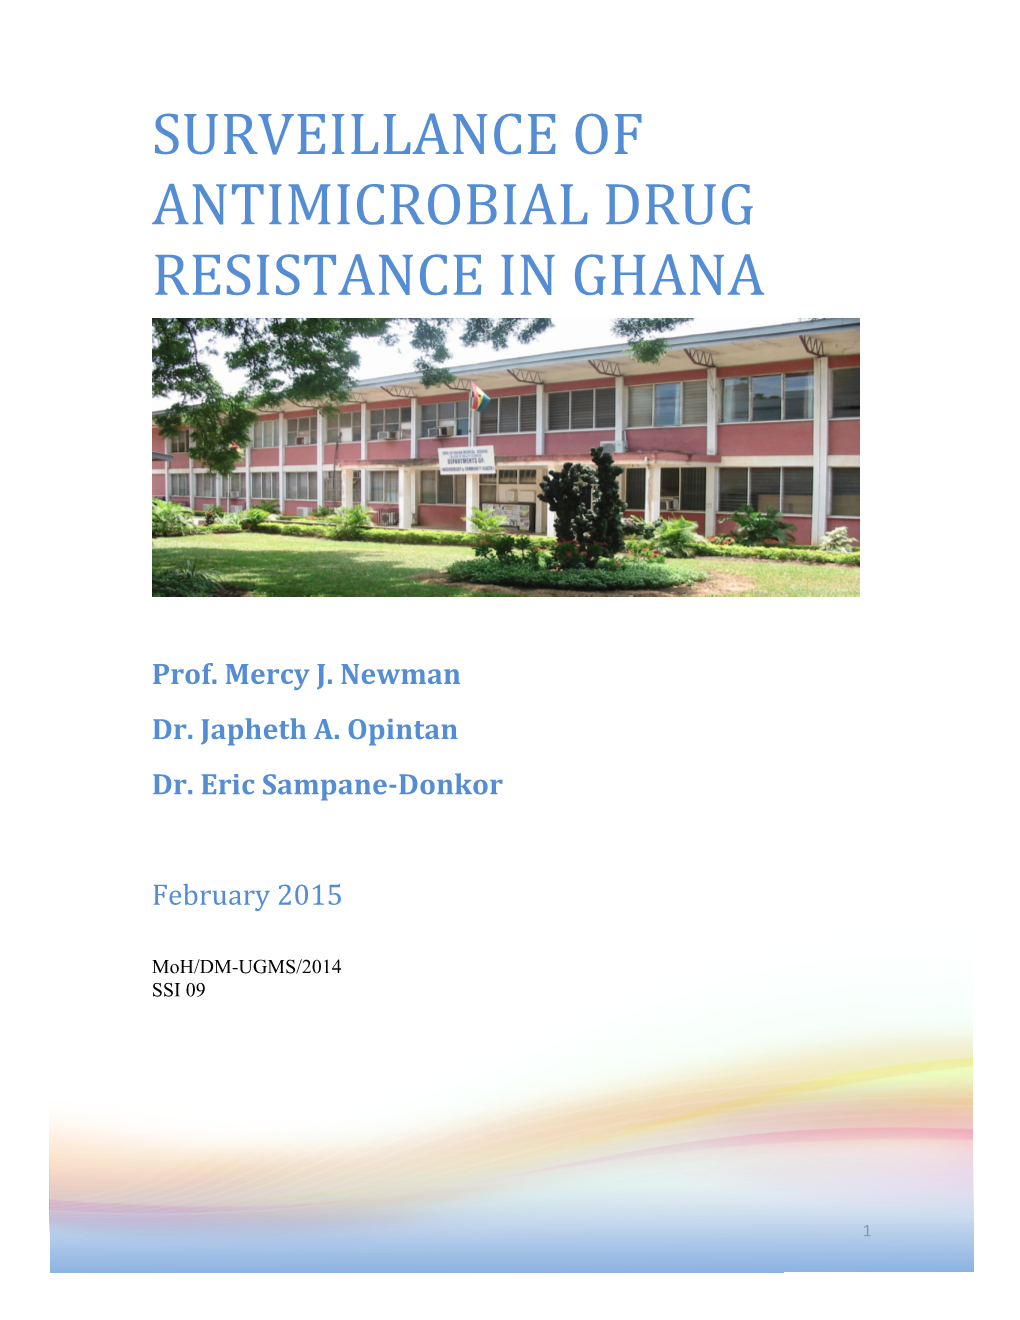 Surveillance of Antimicrobial Drug Resistance in Ghana